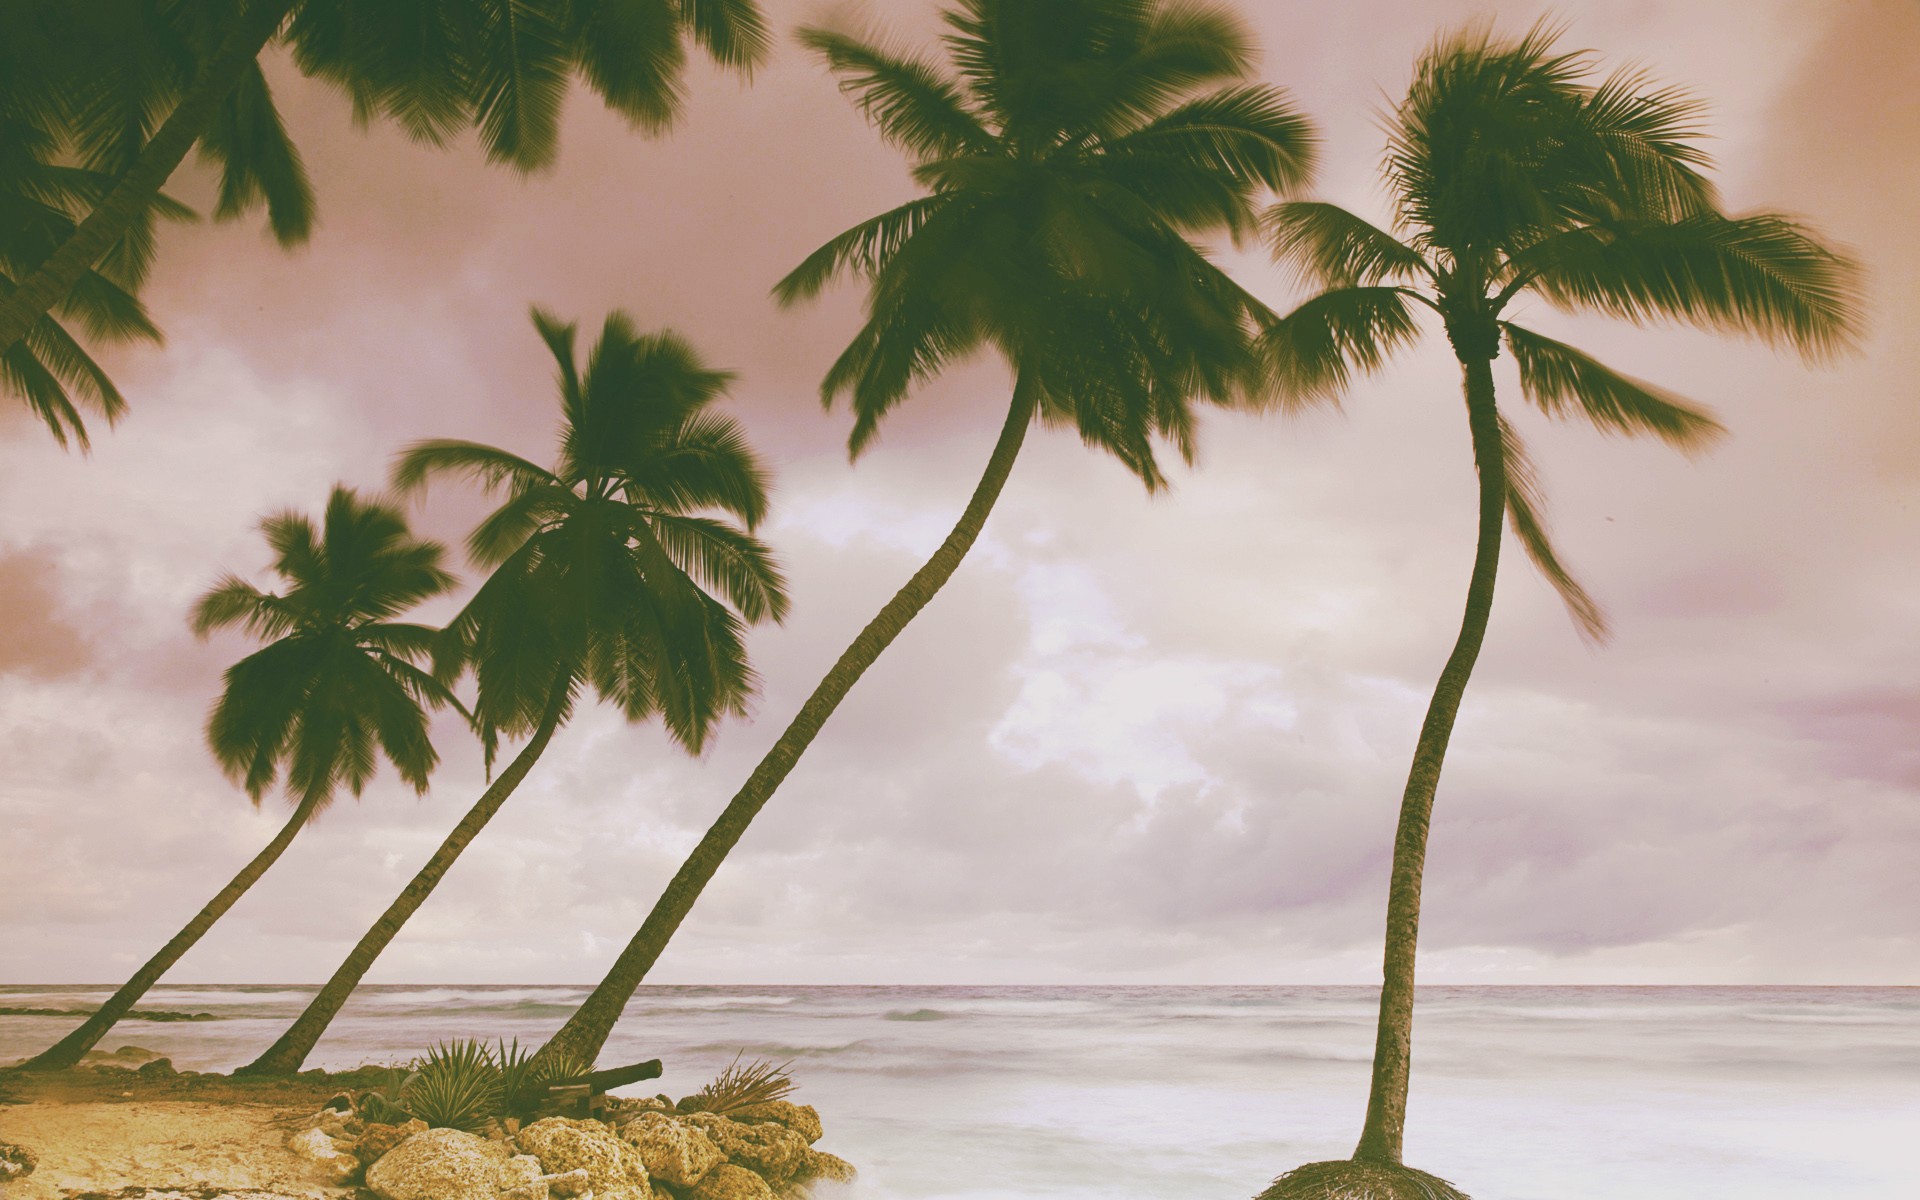 General 1920x1200 palm trees tropical sea low saturation sky horizon trees outdoors